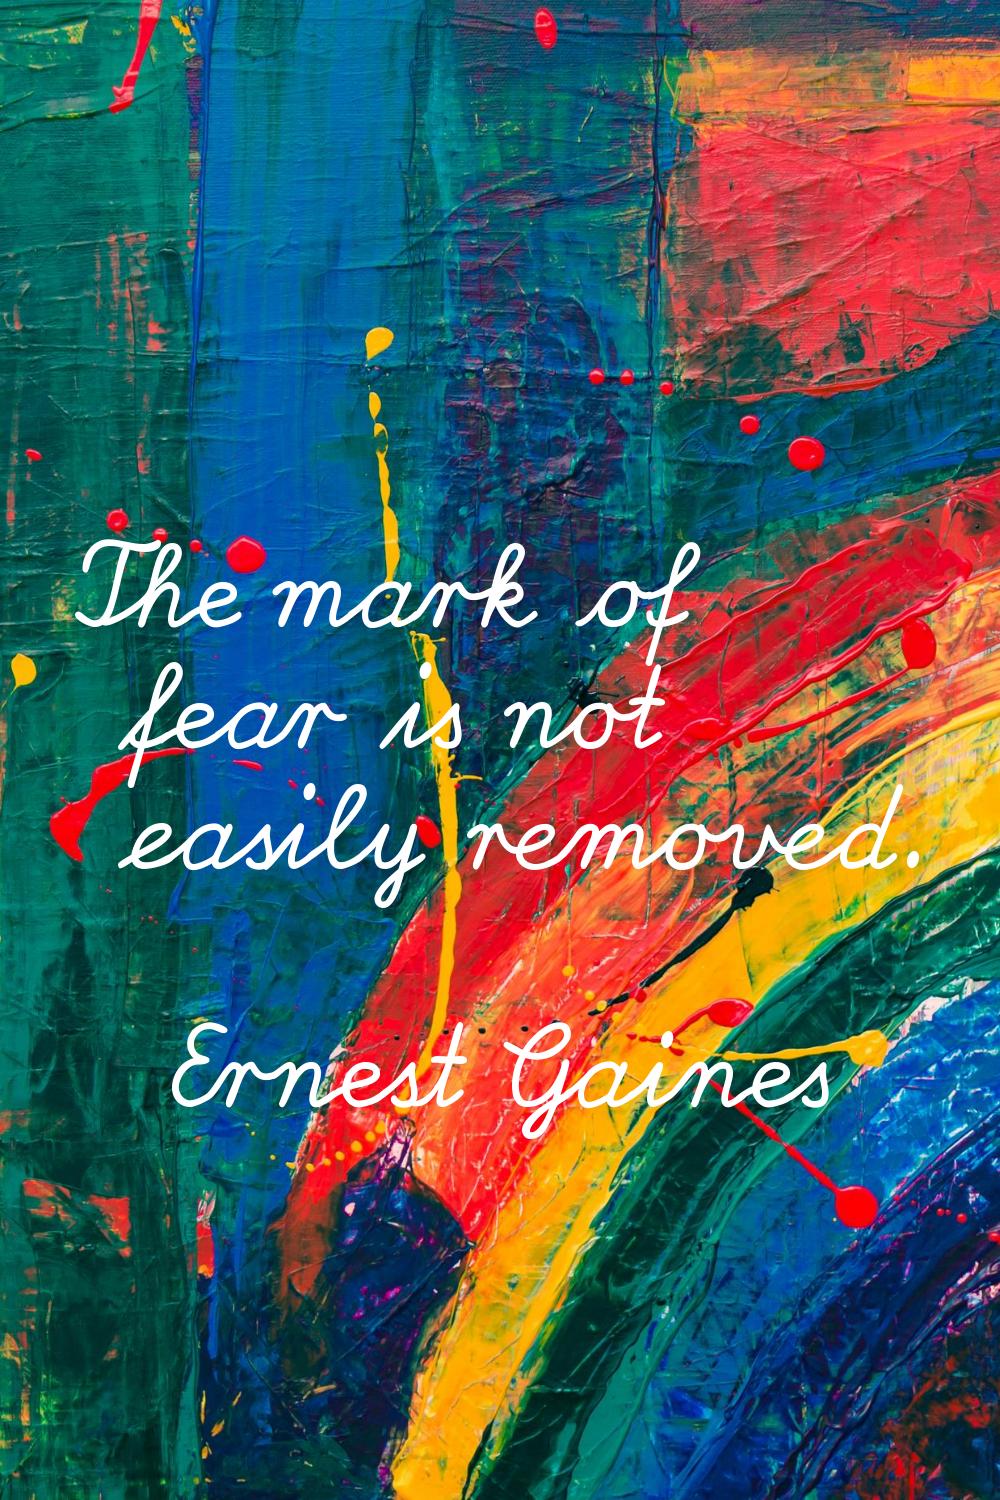 The mark of fear is not easily removed.